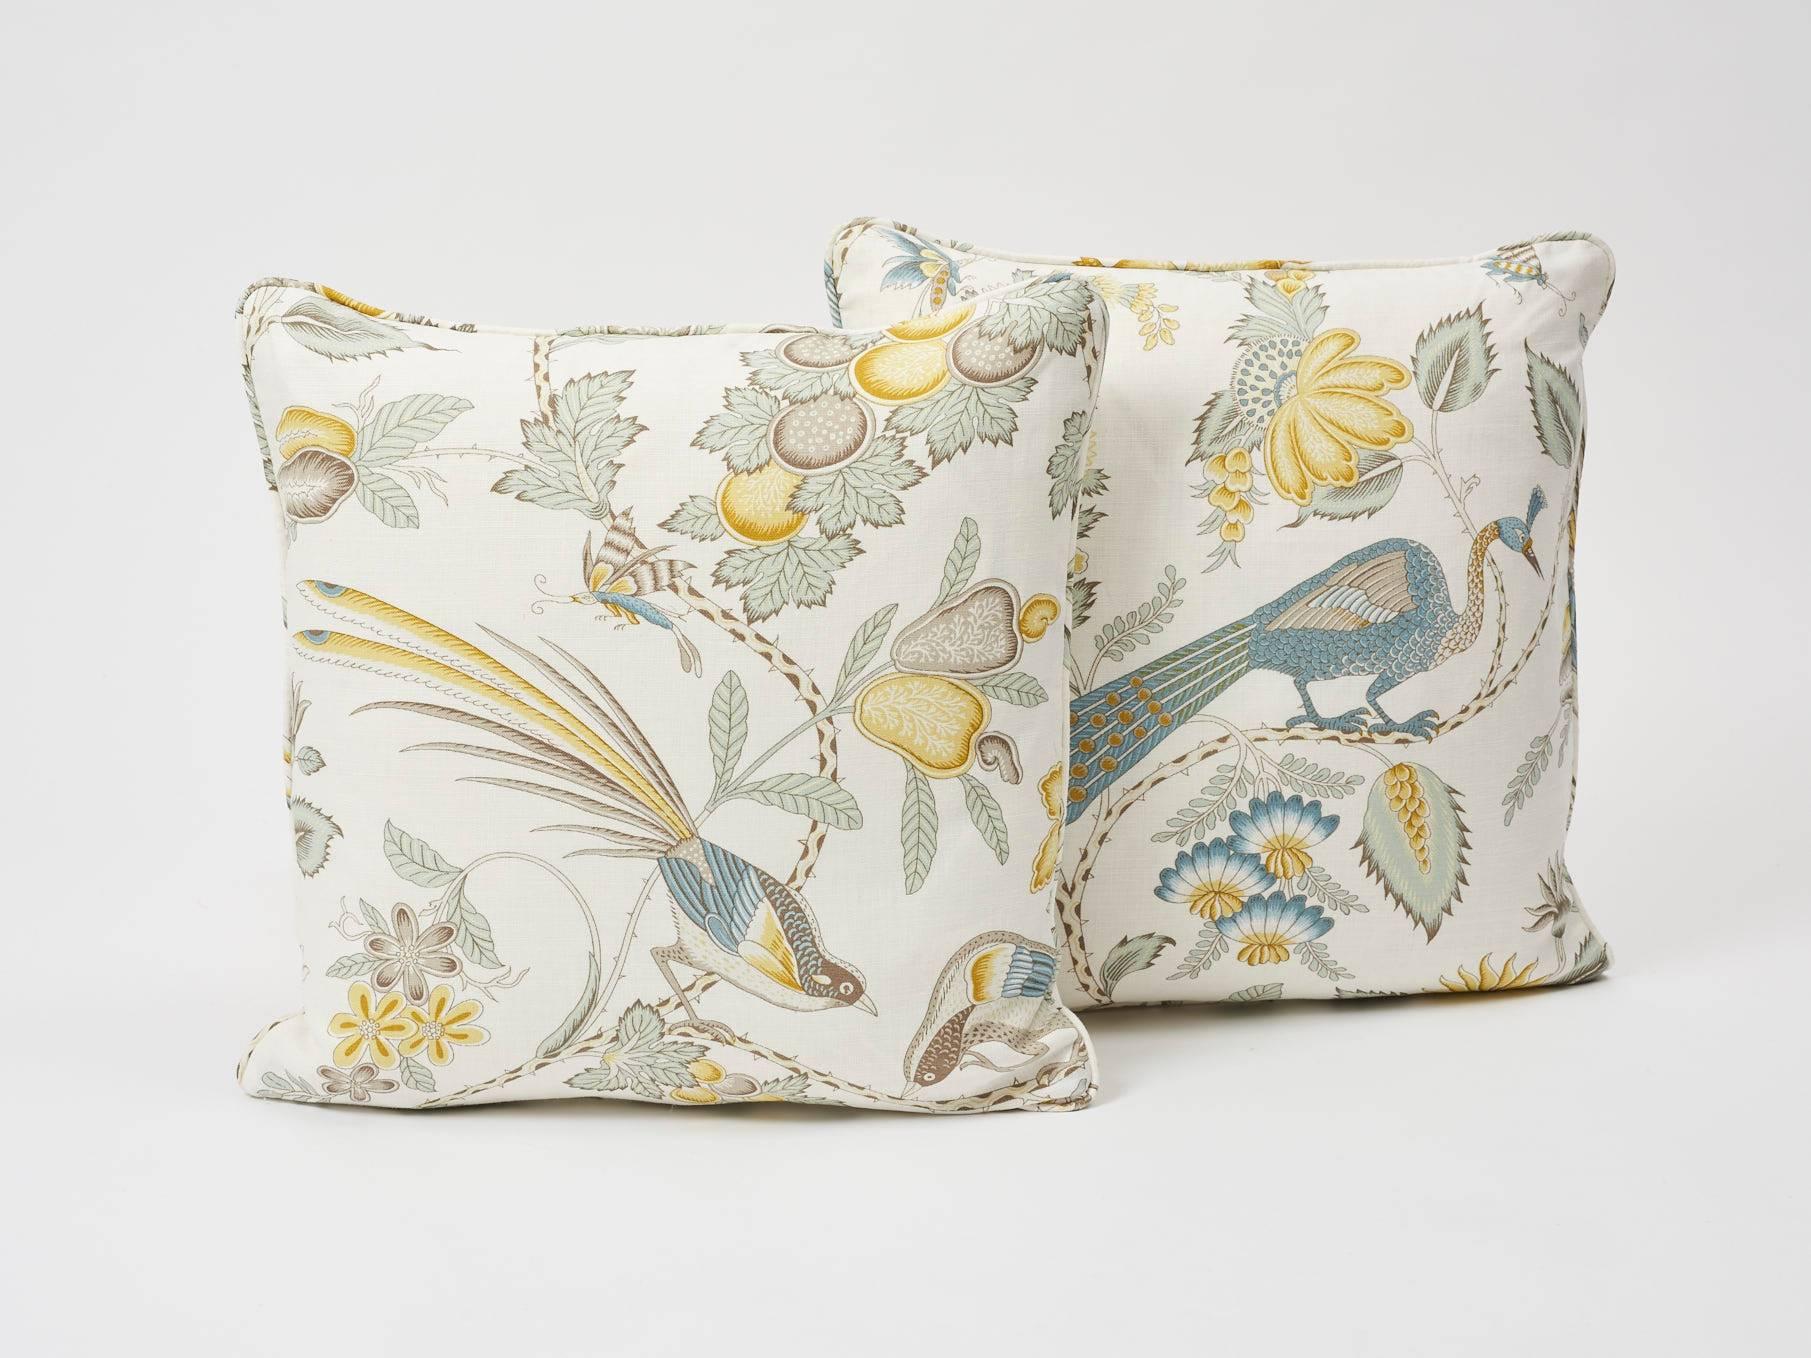 Schumacher Campagne French Floral Linen Cadet and Citron Yellow 18